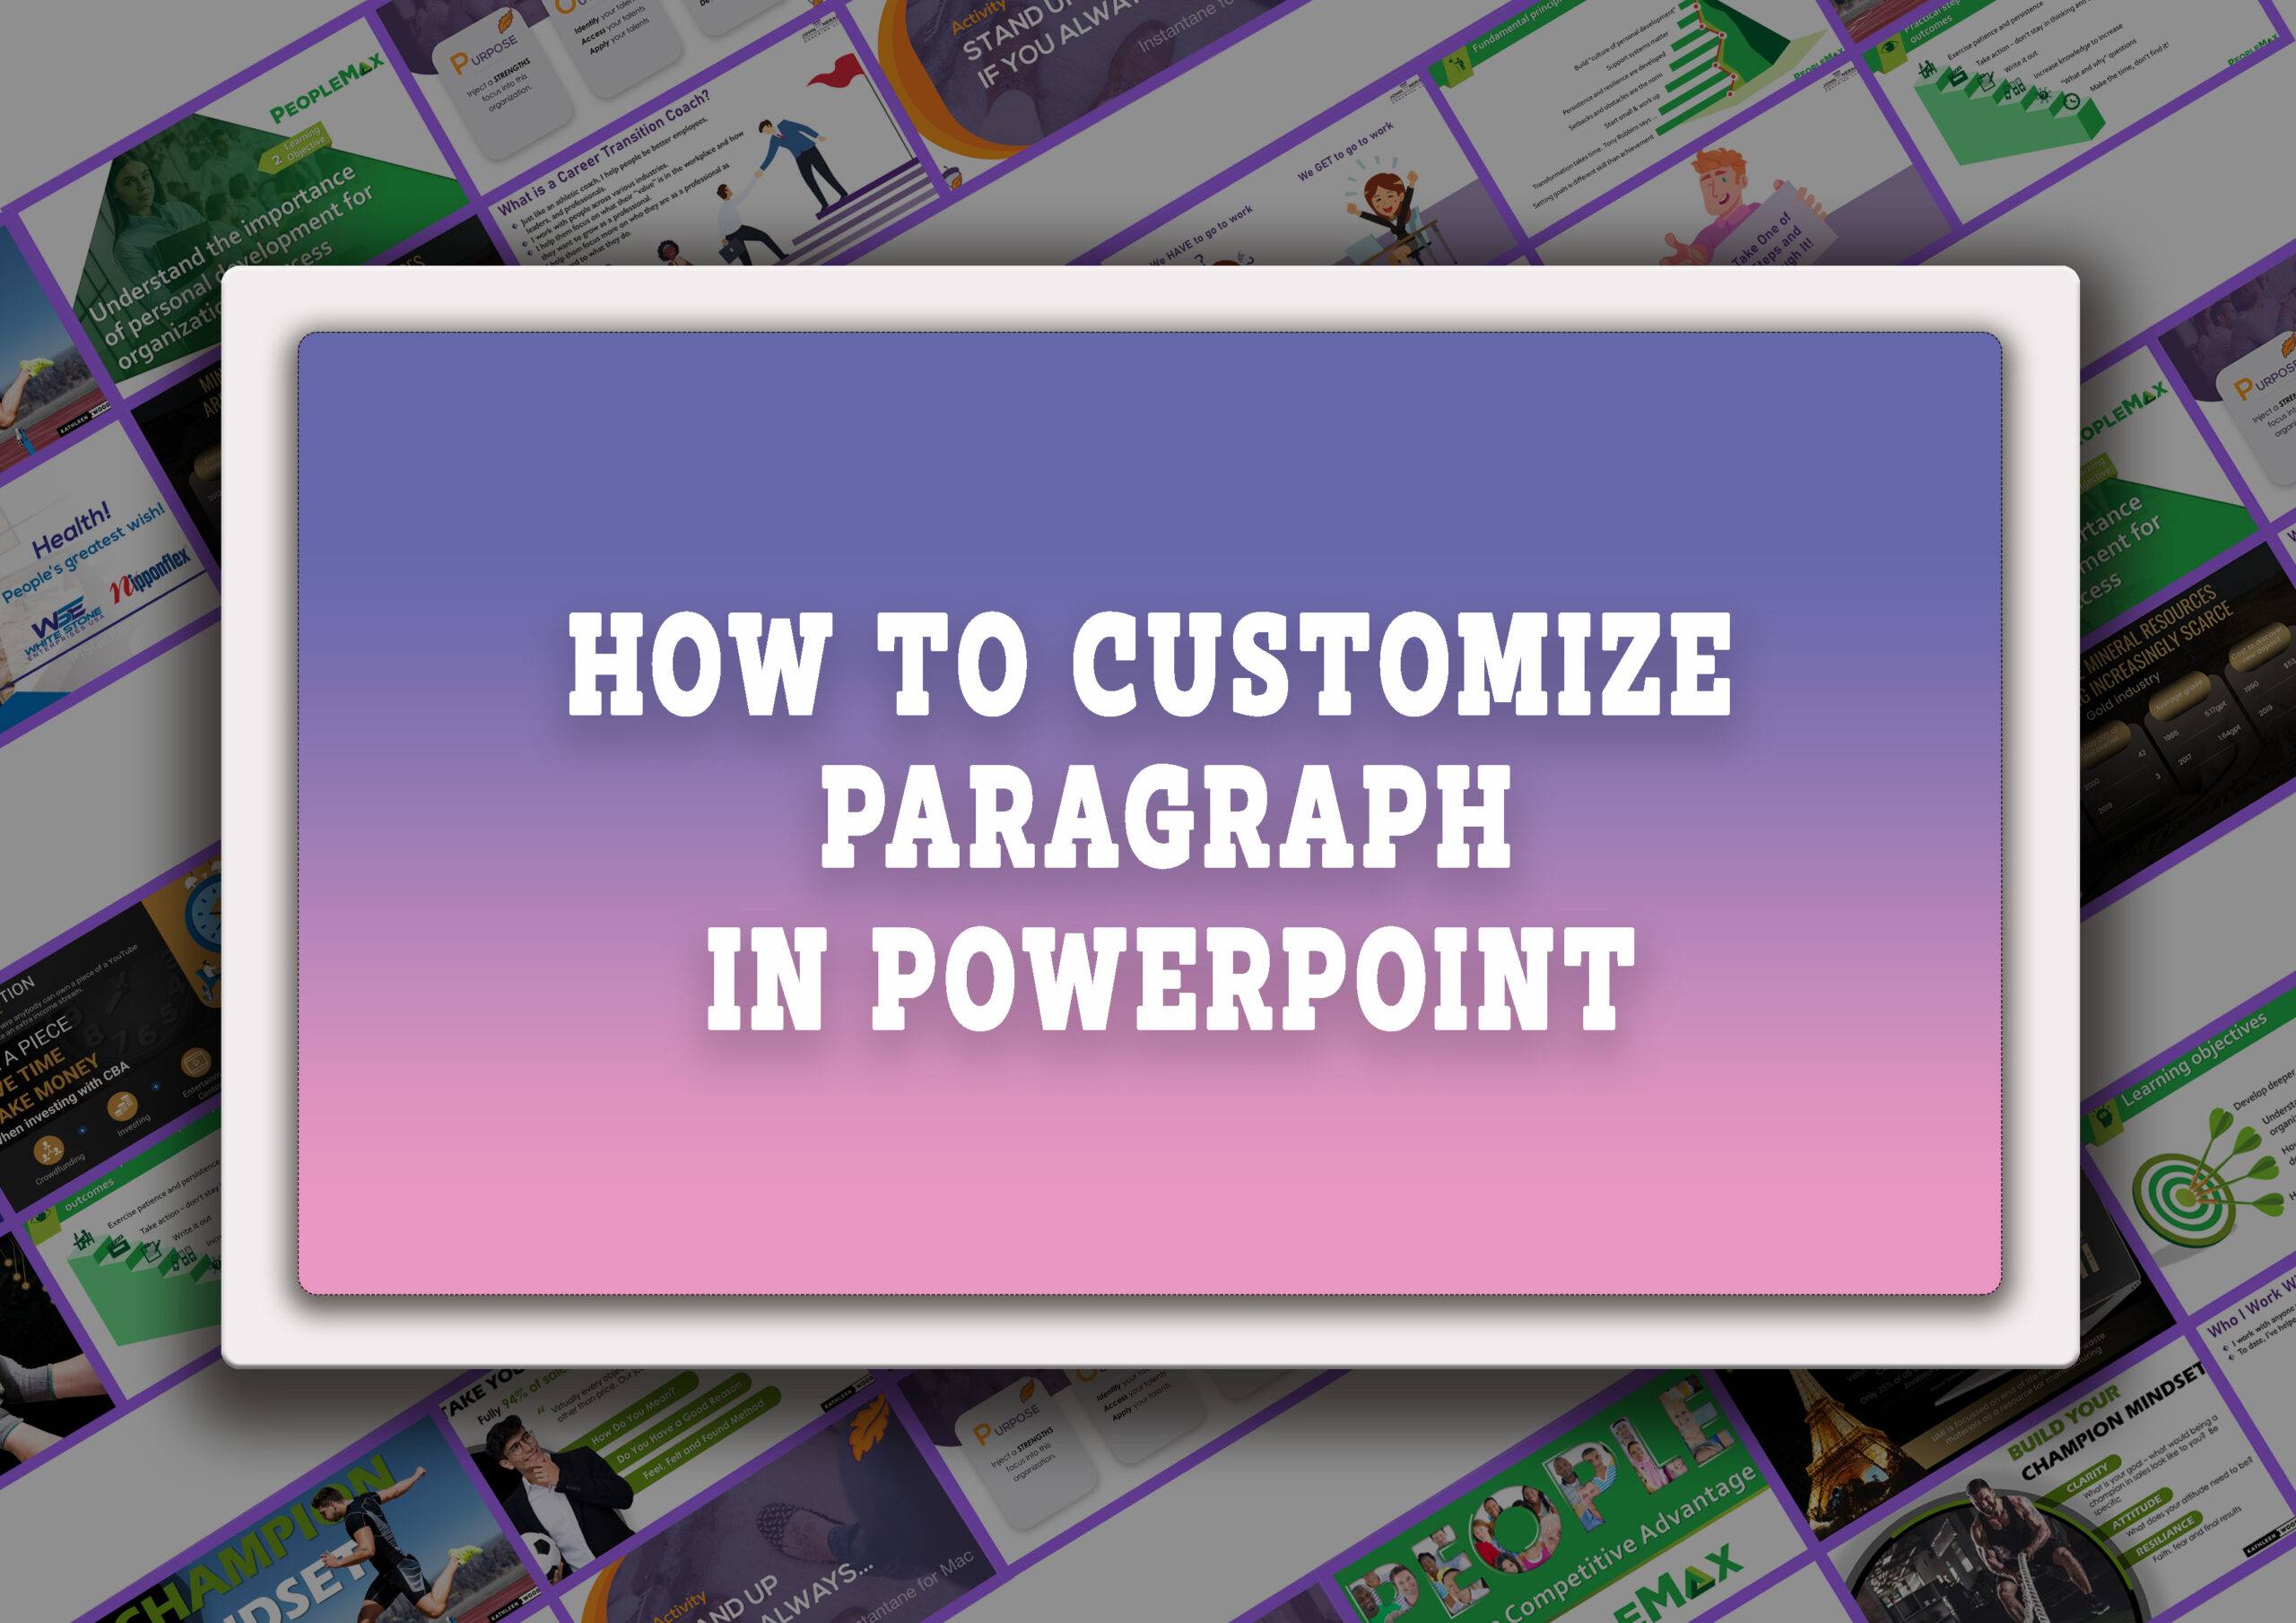 Adding and customizing paragraph in PowerPoint